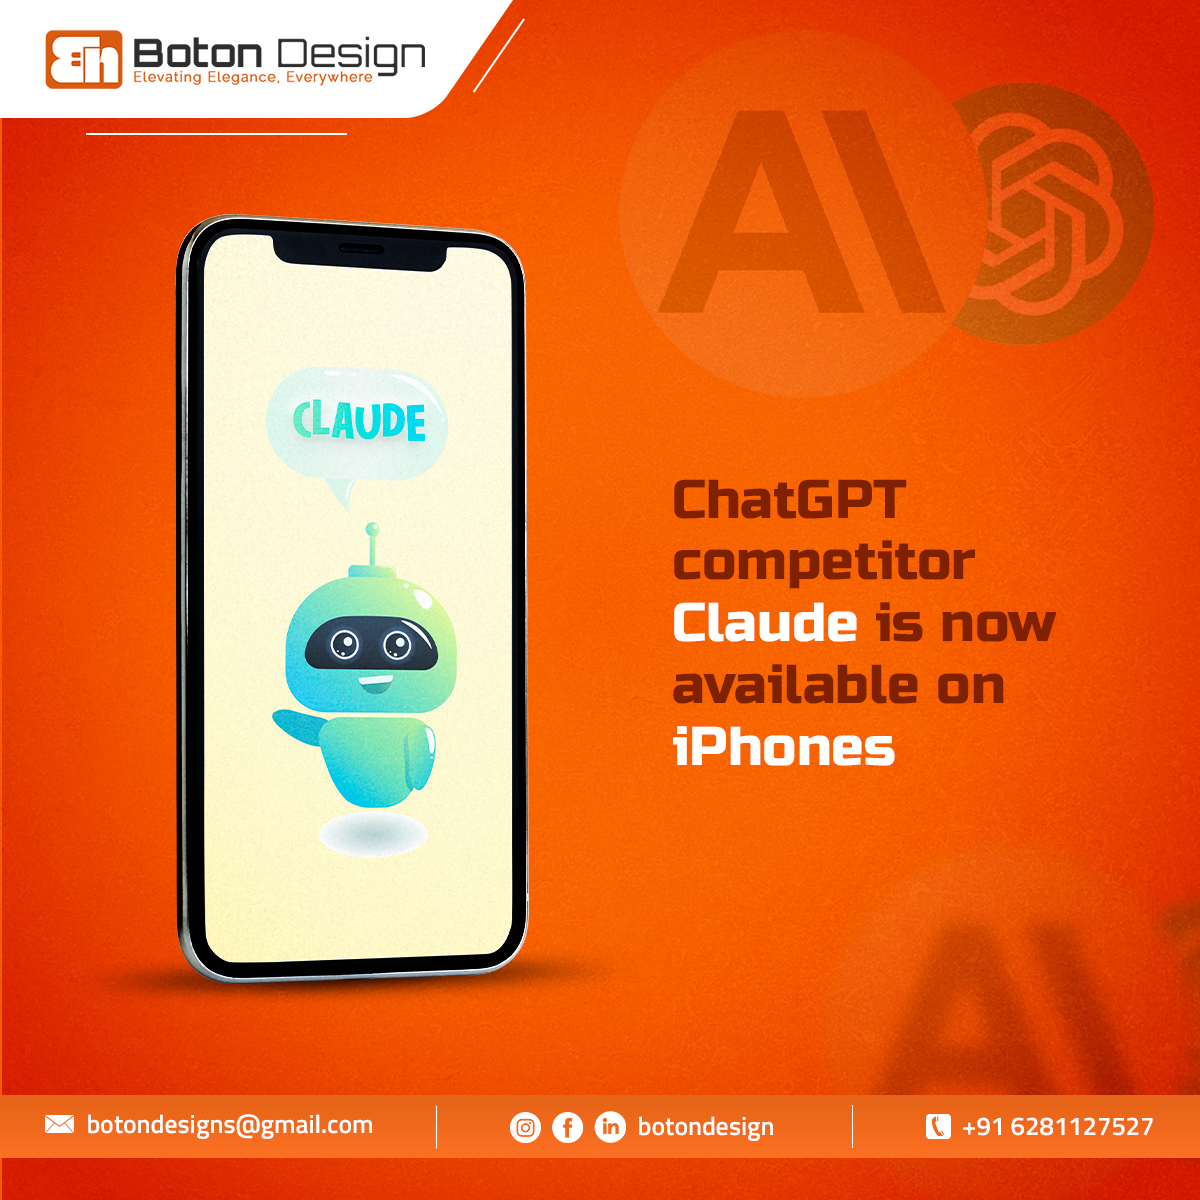 Claude, a ChatGPT competitor, debuts on iPhones, offering versatile conversational AI. Users can engage in diverse interactions seamlessly. 

#ClaudeAI #ChatGPTCompetitor #ConversationalAI #iPhoneApp #VirtualAssistant #NaturalLanguageProcessing #AICompetition #TechNews #iOSApps